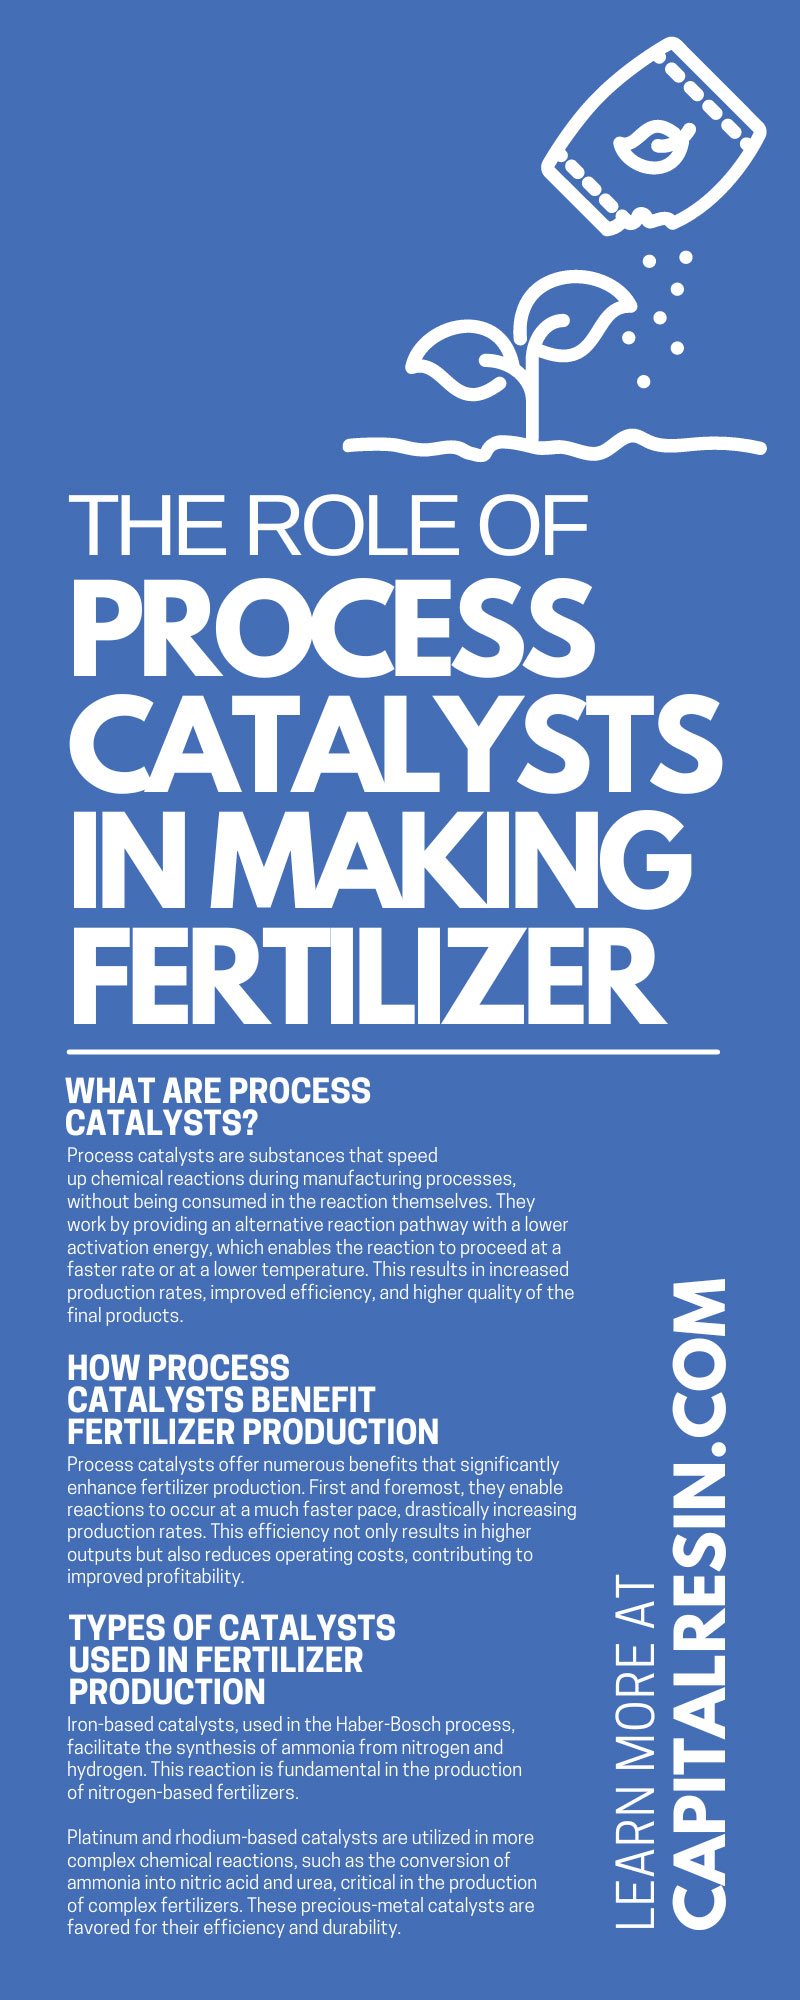 The Role of Process Catalysts in Making Fertilizer